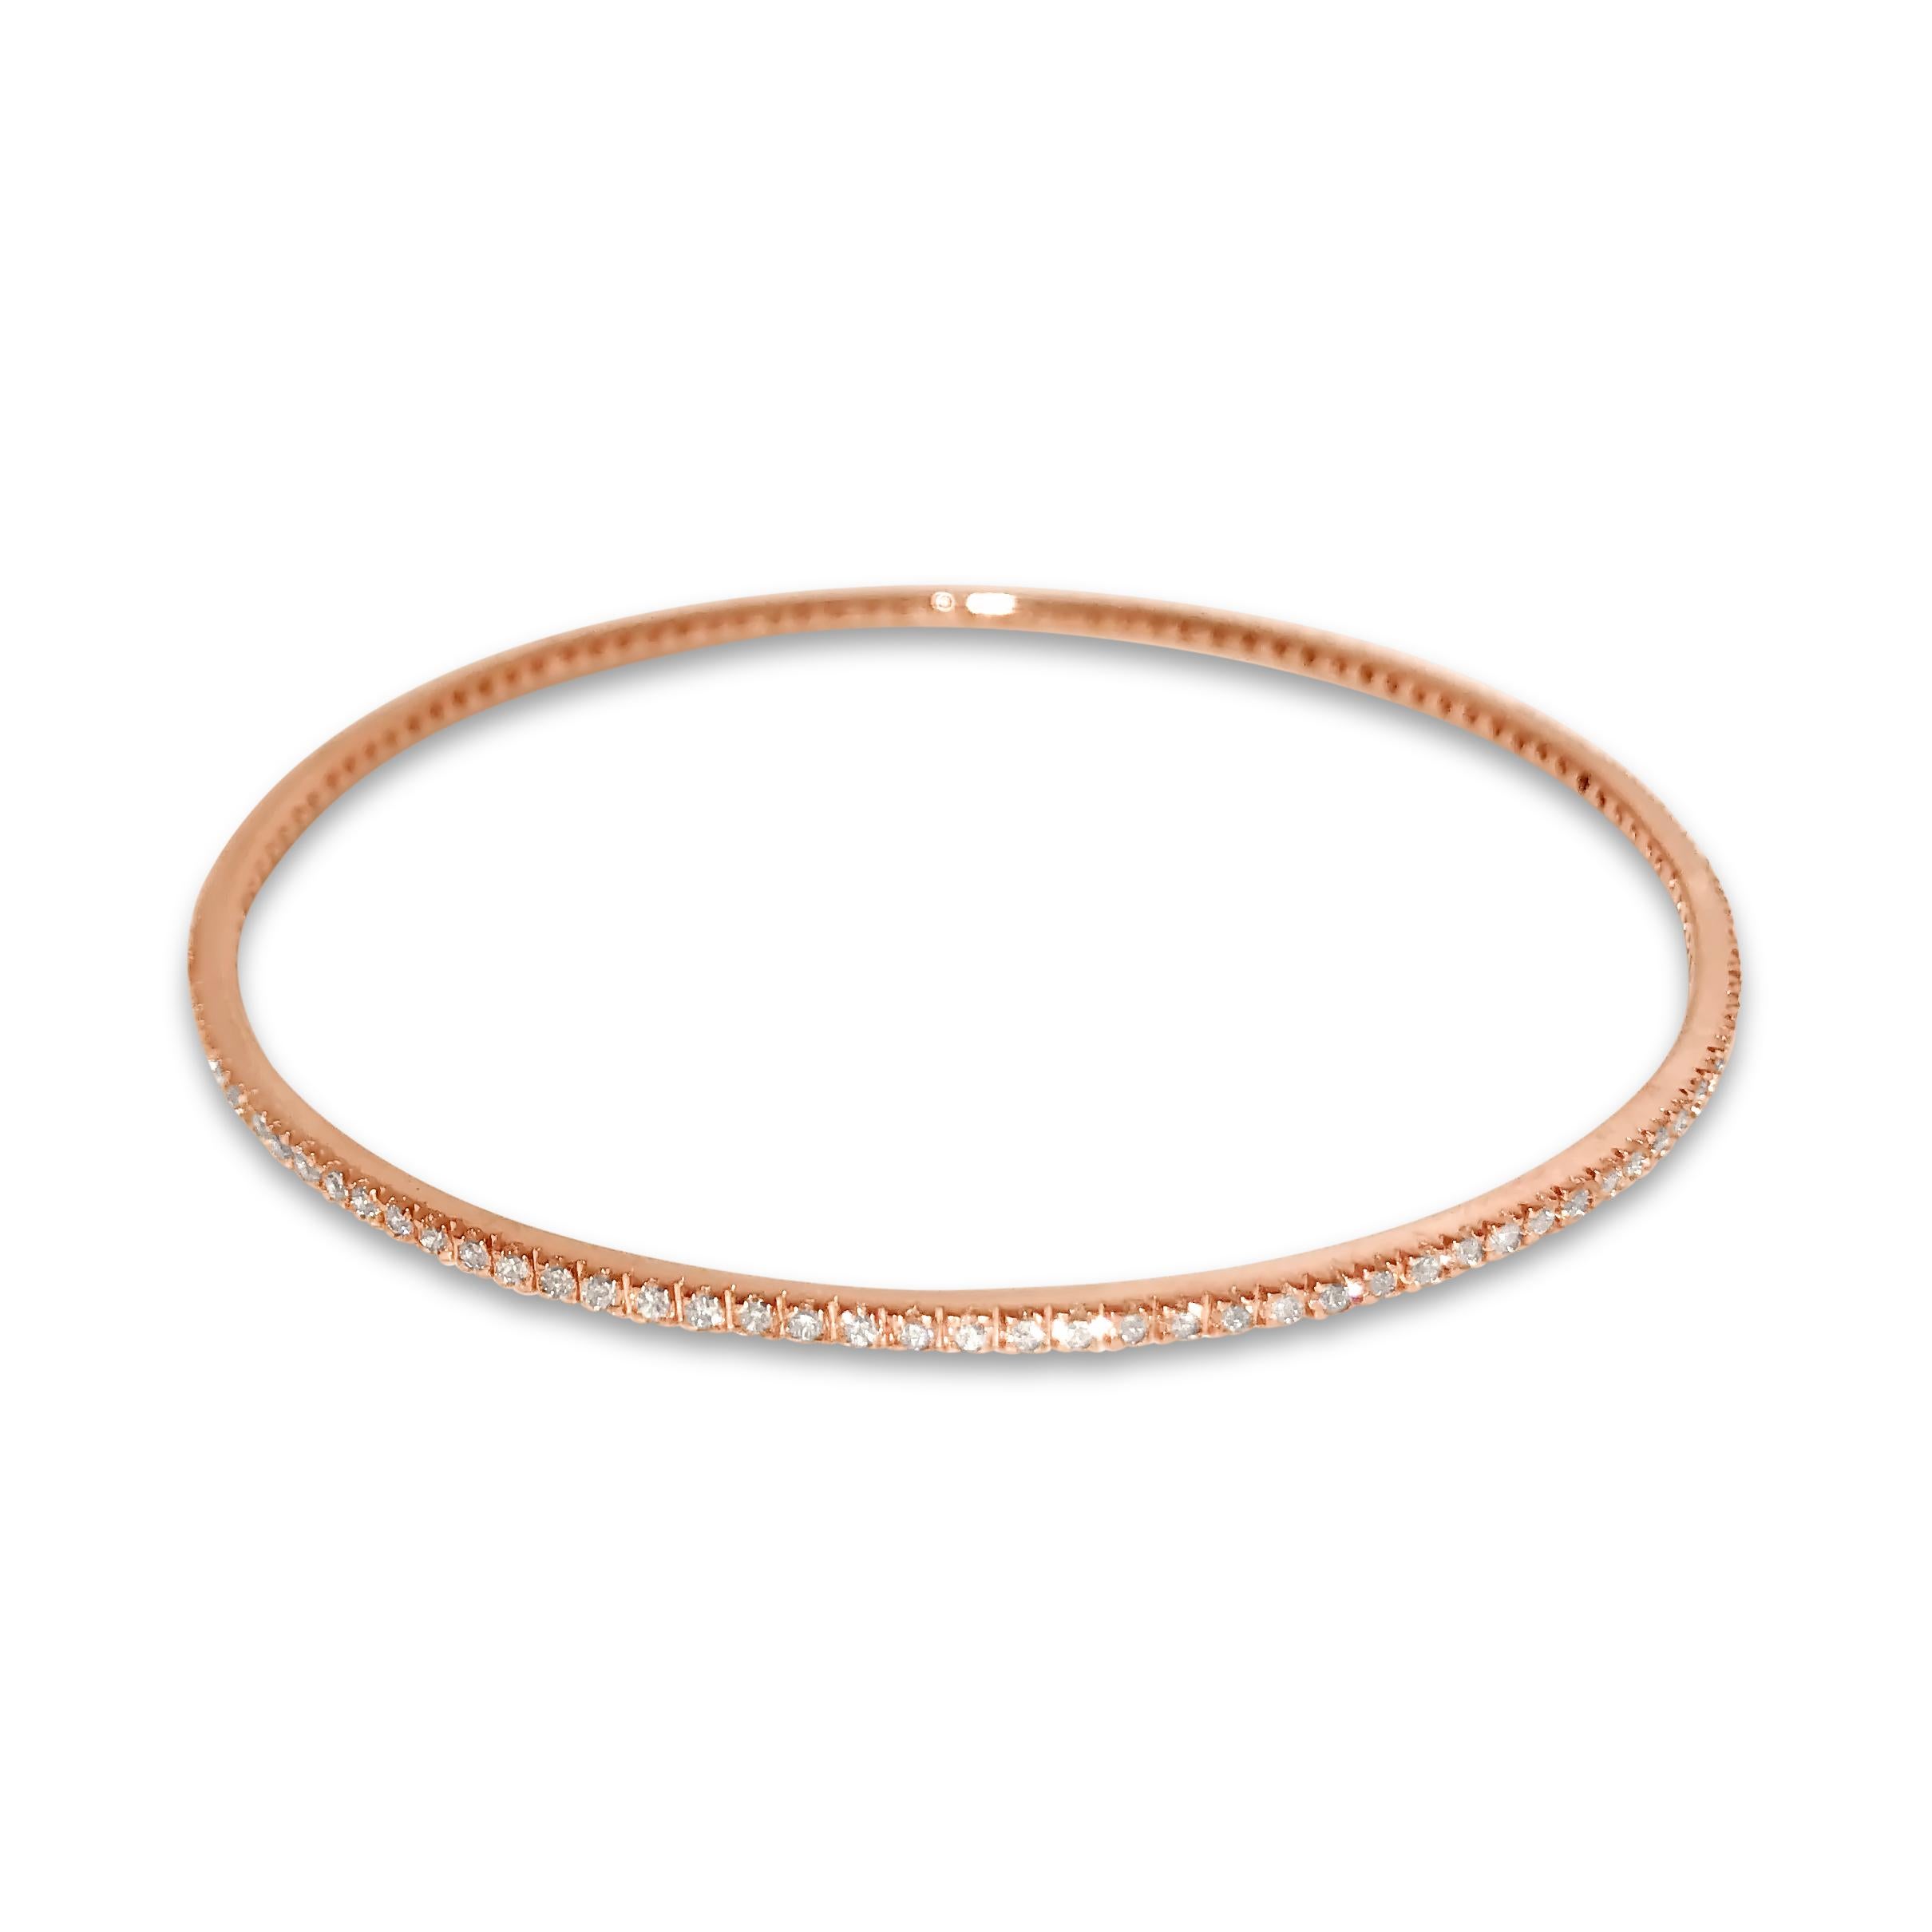 The quintessential diamond pavé round bangle – just slip on and start stacking! Set in 14K rose gold and featuring 120 round 1.4mm white diamonds totaling 1.50ct.

Specifications:
- Stone(s): White Diamond
- Diamond-Cut & Clarity:  1.50cts. Round
-